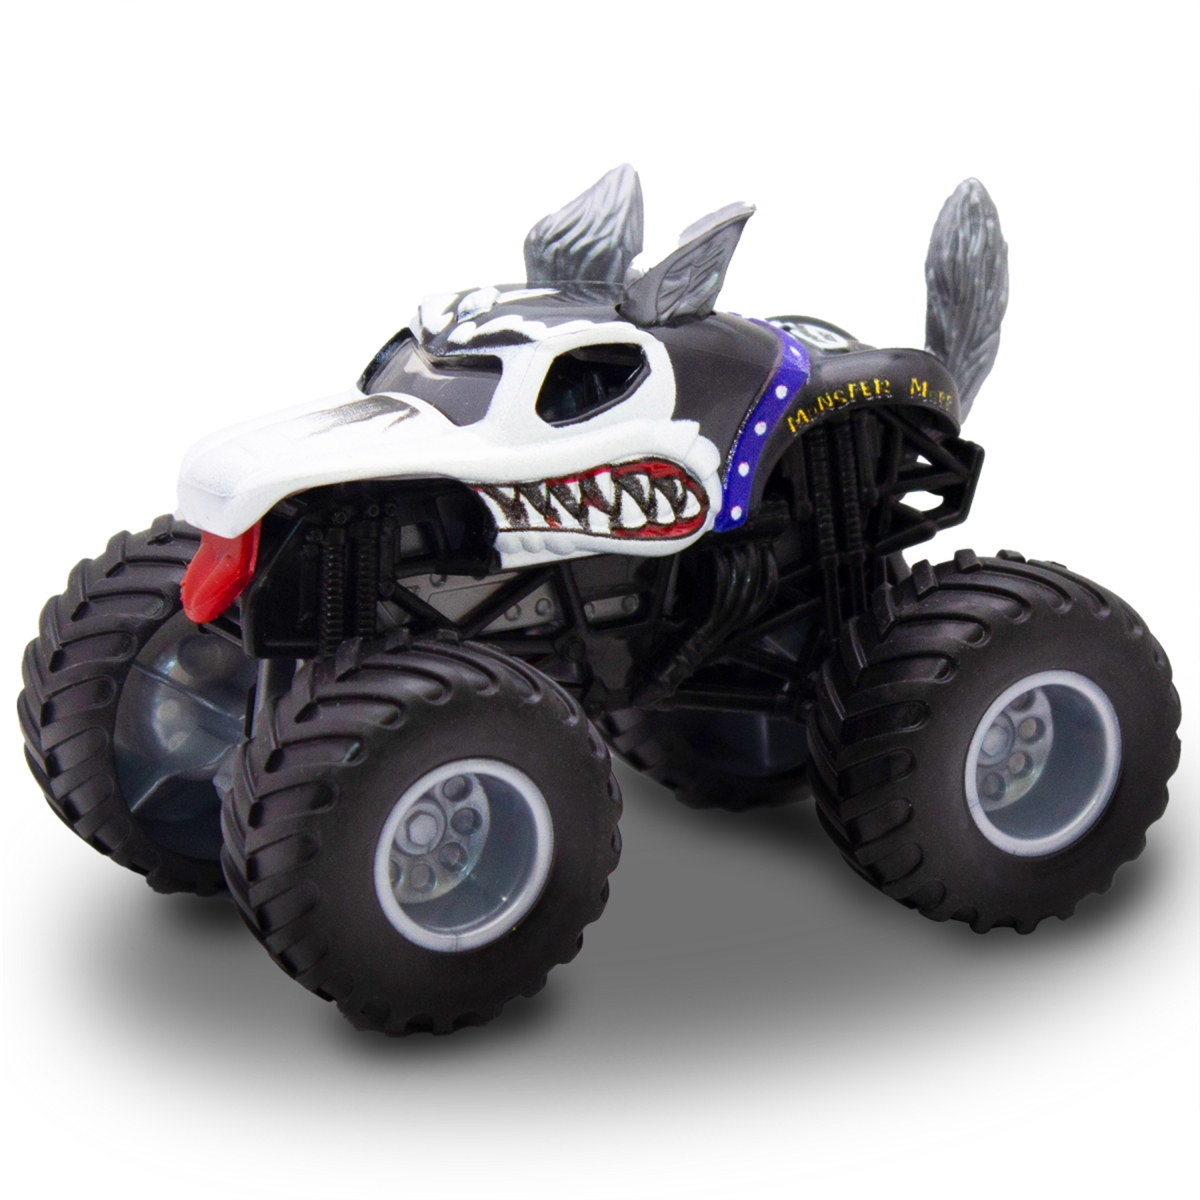 Picture of Zummy FS1149-M1 Off-Road Model Pickup Truck Toy